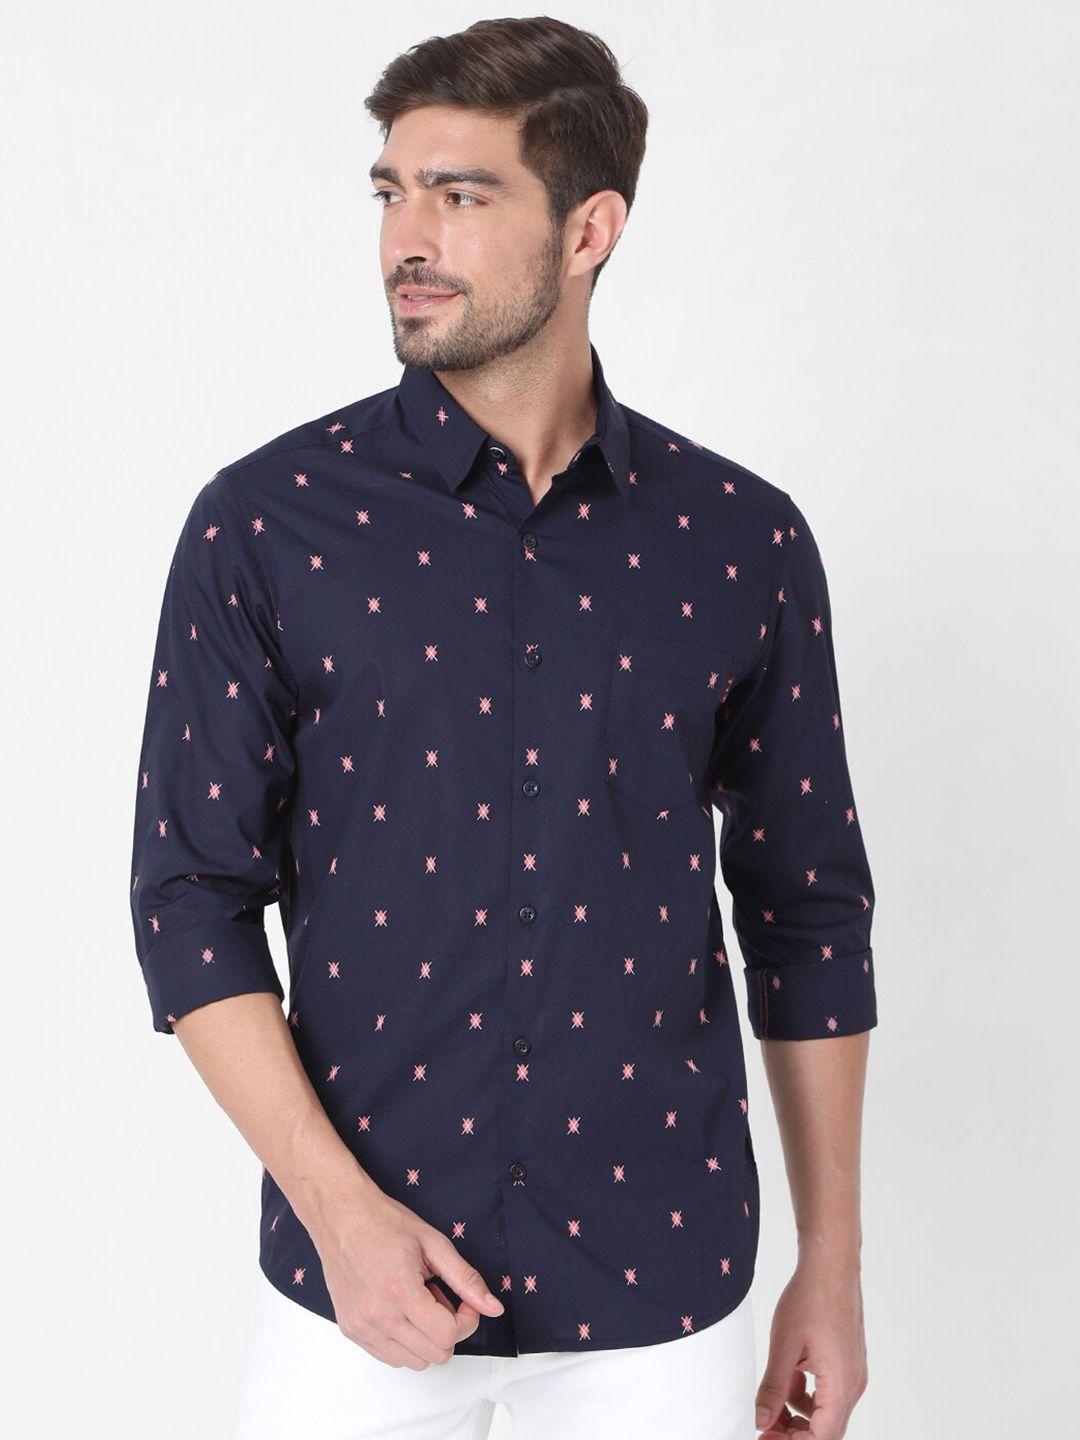 mufti-men-navy-blue-slim-fit-printed-cotton-casual-shirt